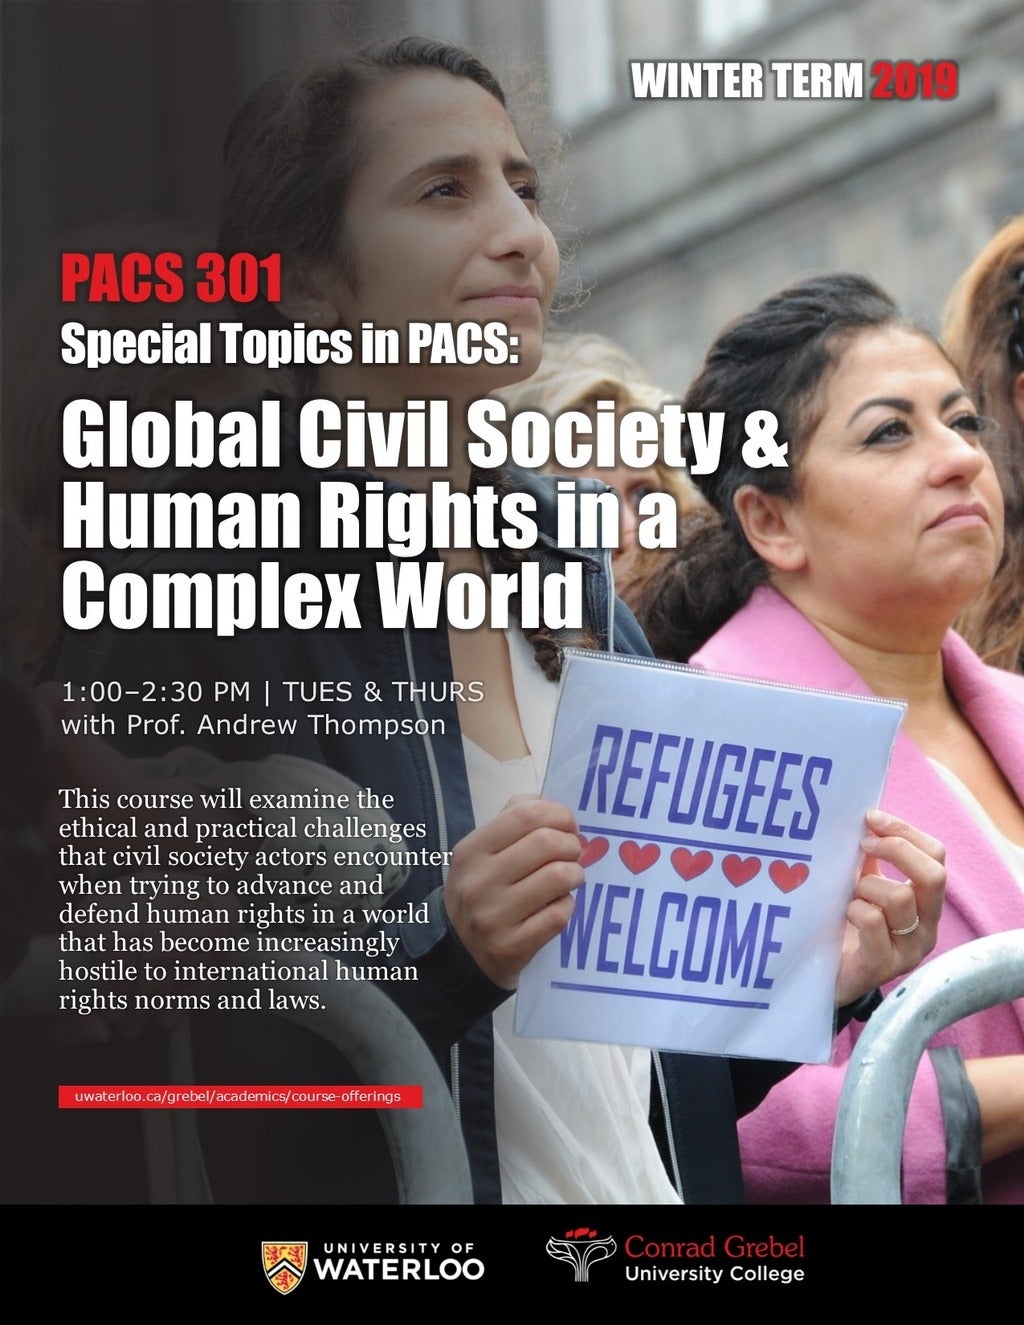 Poster for PACS 301. Features women holding signs that read "Refugees welcome." Also has information about the course.